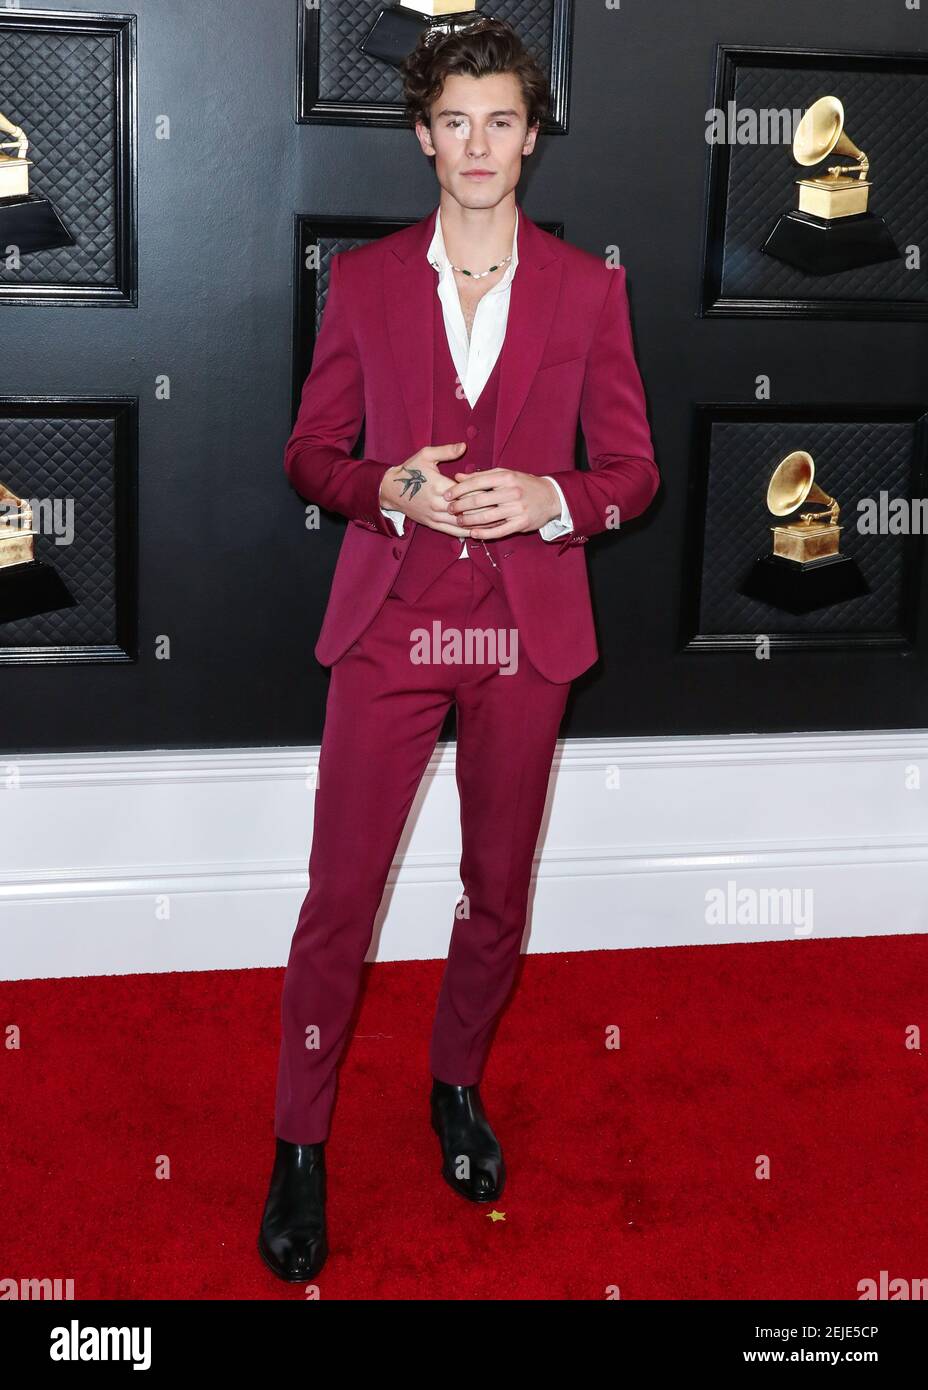 Louis Vuitton on X: .@ShawnMendess in a custom #LouisVuitton suit by  @virgilabloh at the 62nd Annual #GrammyAwards in Los Angeles.   / X